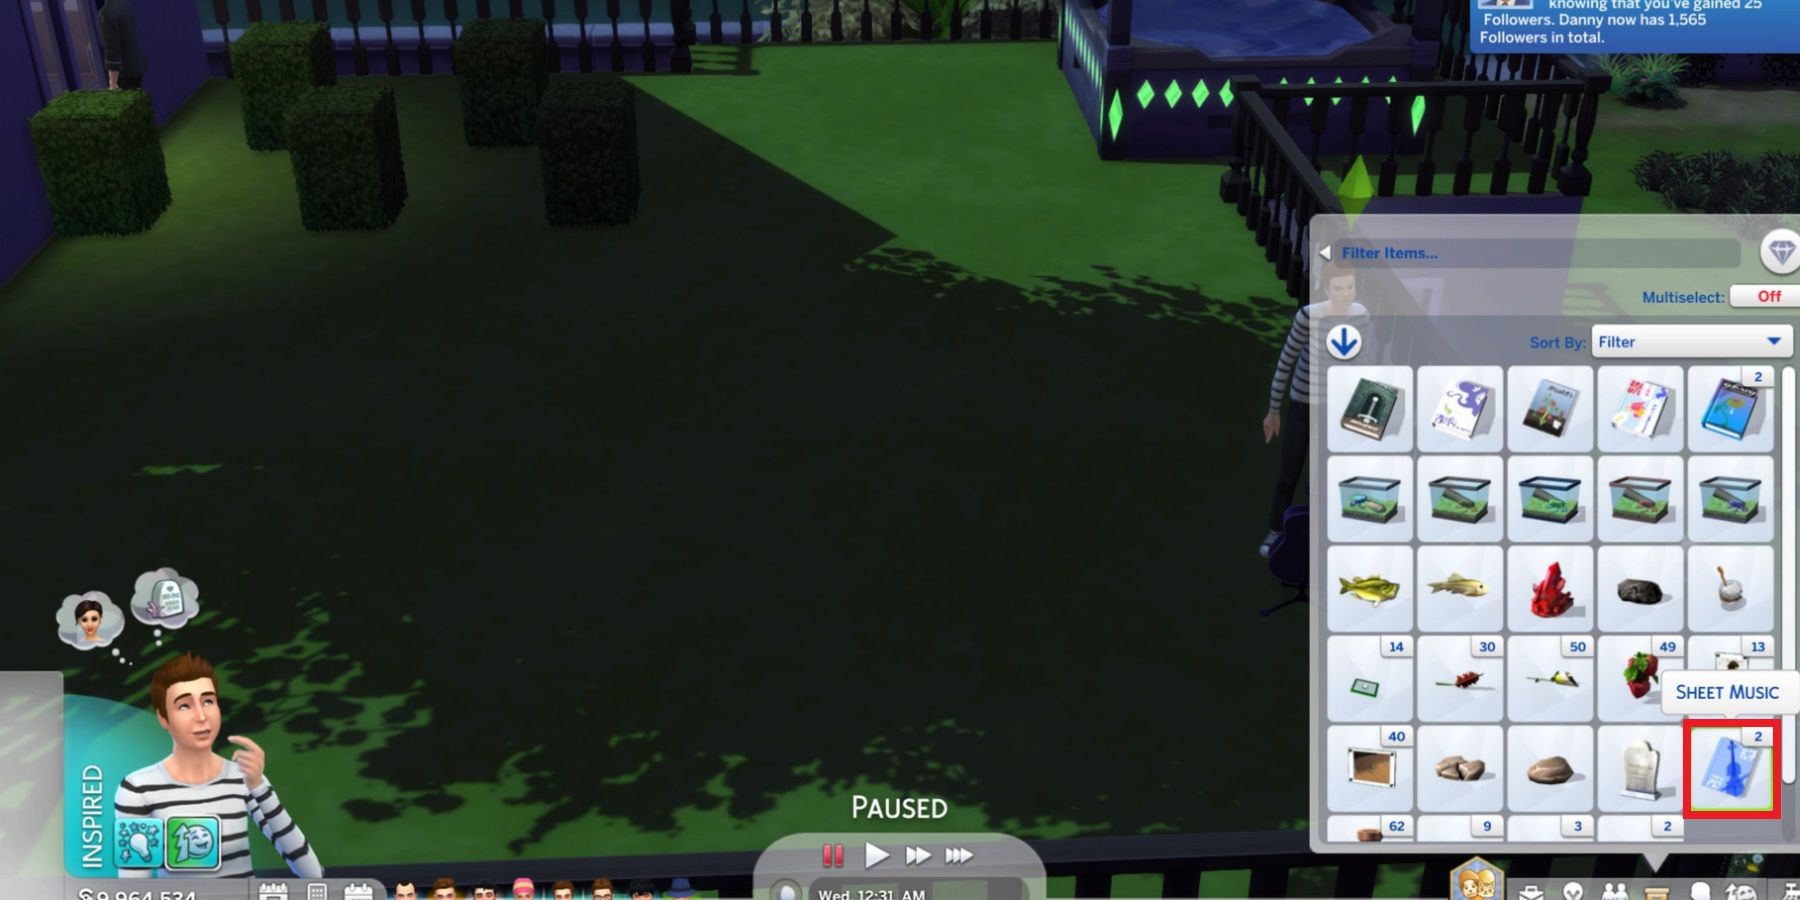 Sheet Music in a Sim's inventory in The Sims 4